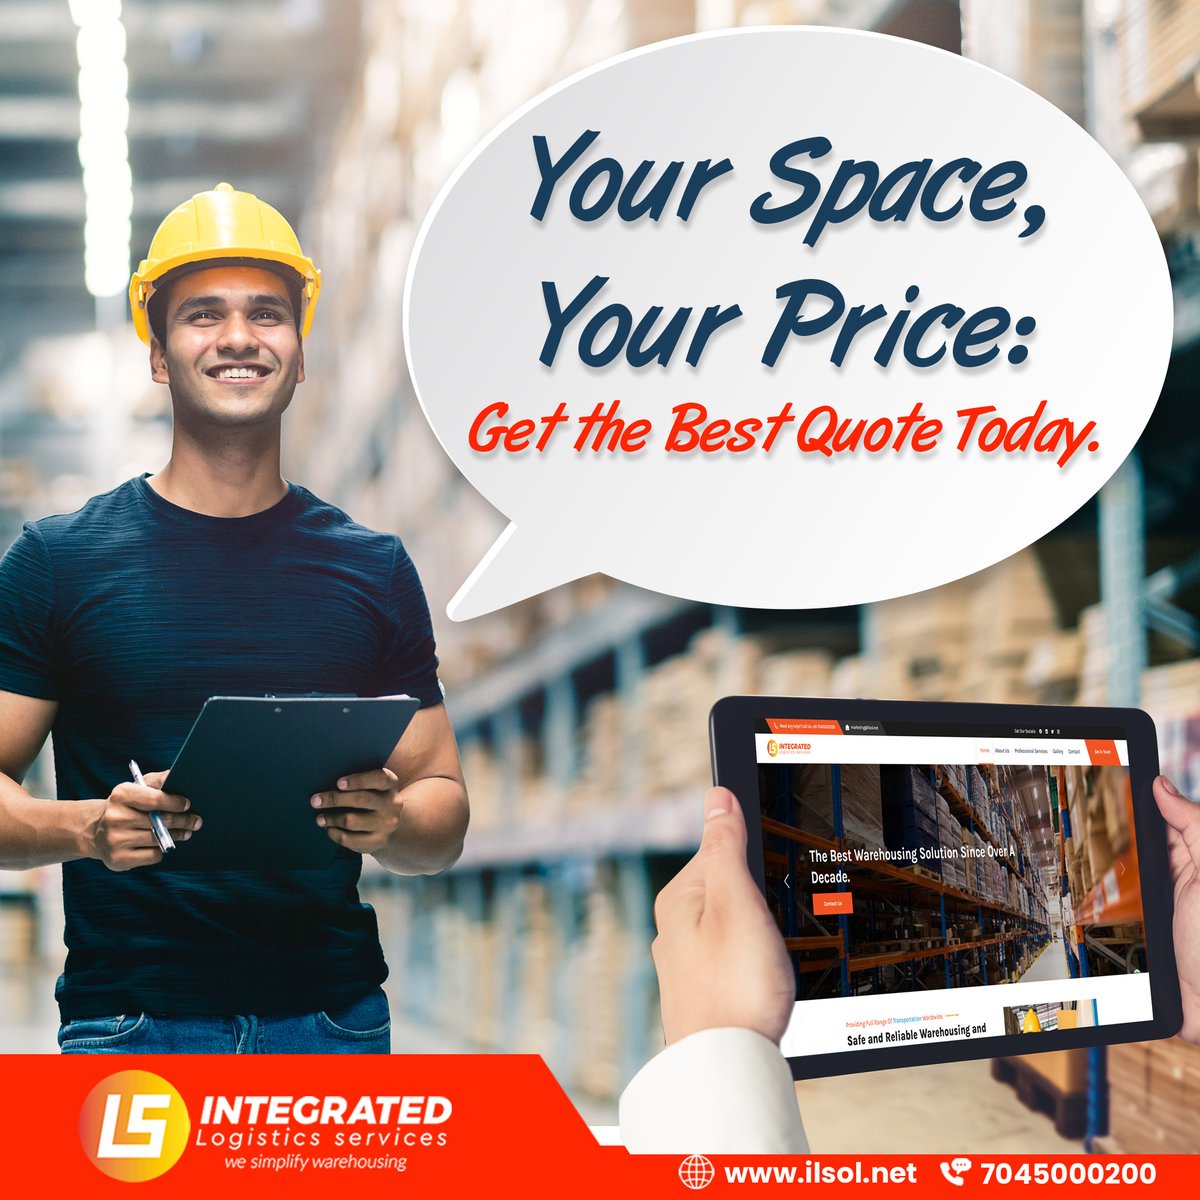 Optimize your storage costs with Integrated Logistics Services! 📦💲 Get the best quote for your warehousing solutions and experience excellence in storage, handling, and logistics.

#IntegratedLogisticsServices #logistics #logisticscompany #logisticsservices